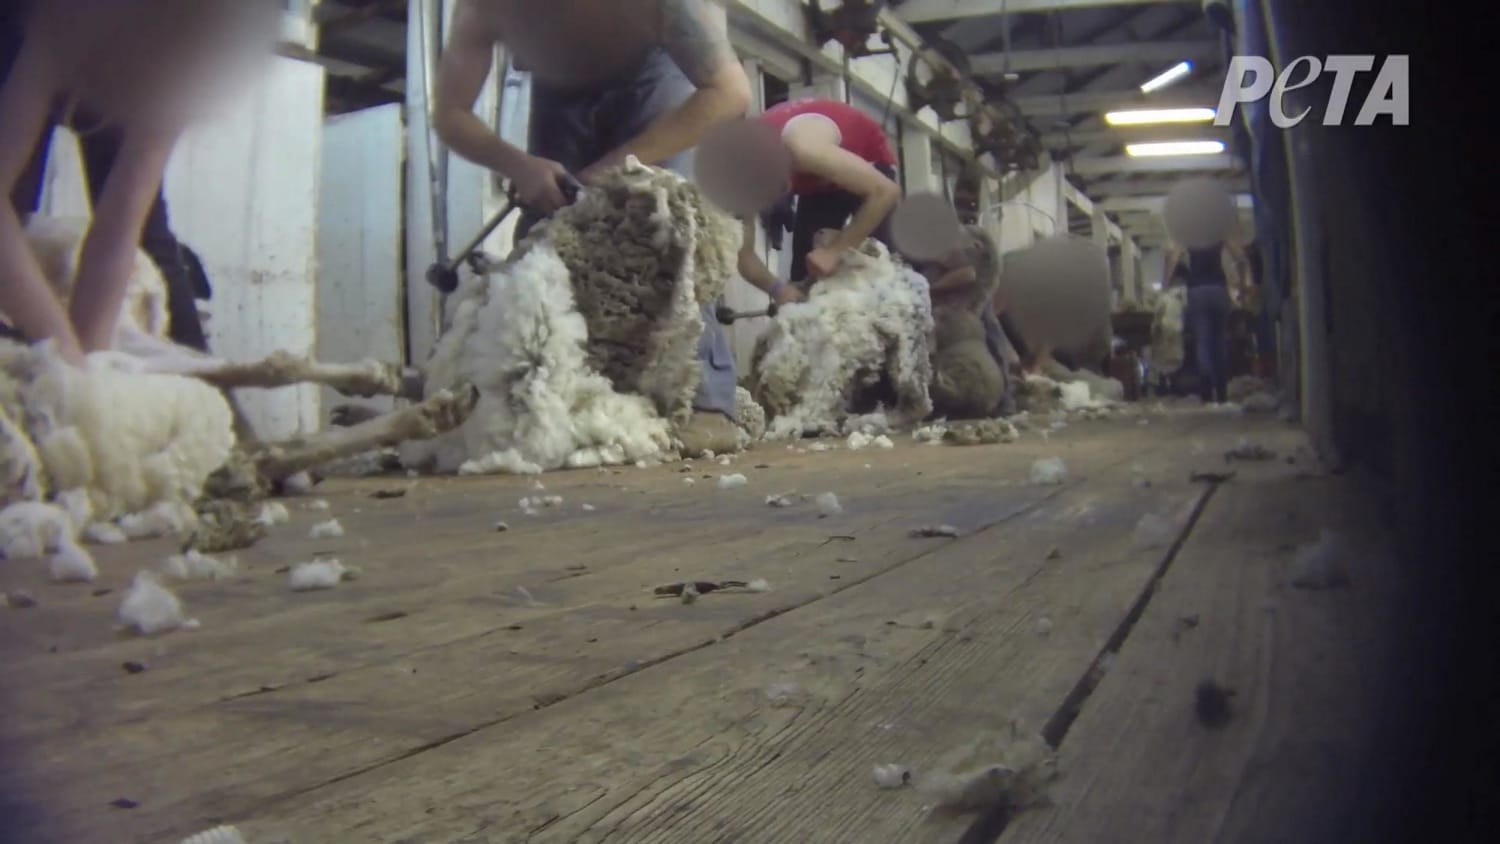 PETA: There's No Such Thing as Humane Wool - NBC News2500 x 1406